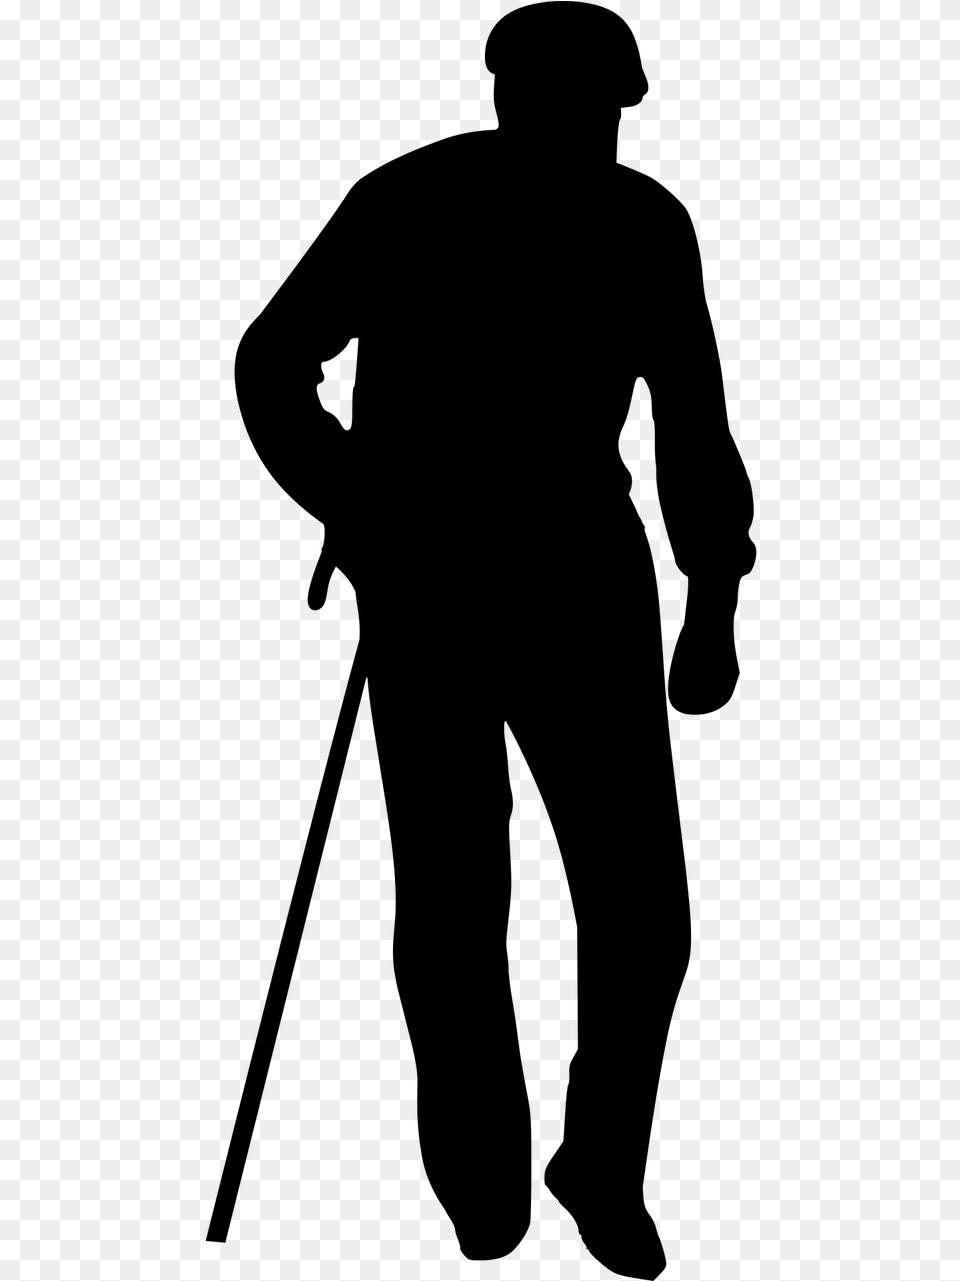 Best Walking Cane For Balance Old People Silhouette, Gray Free Png Download